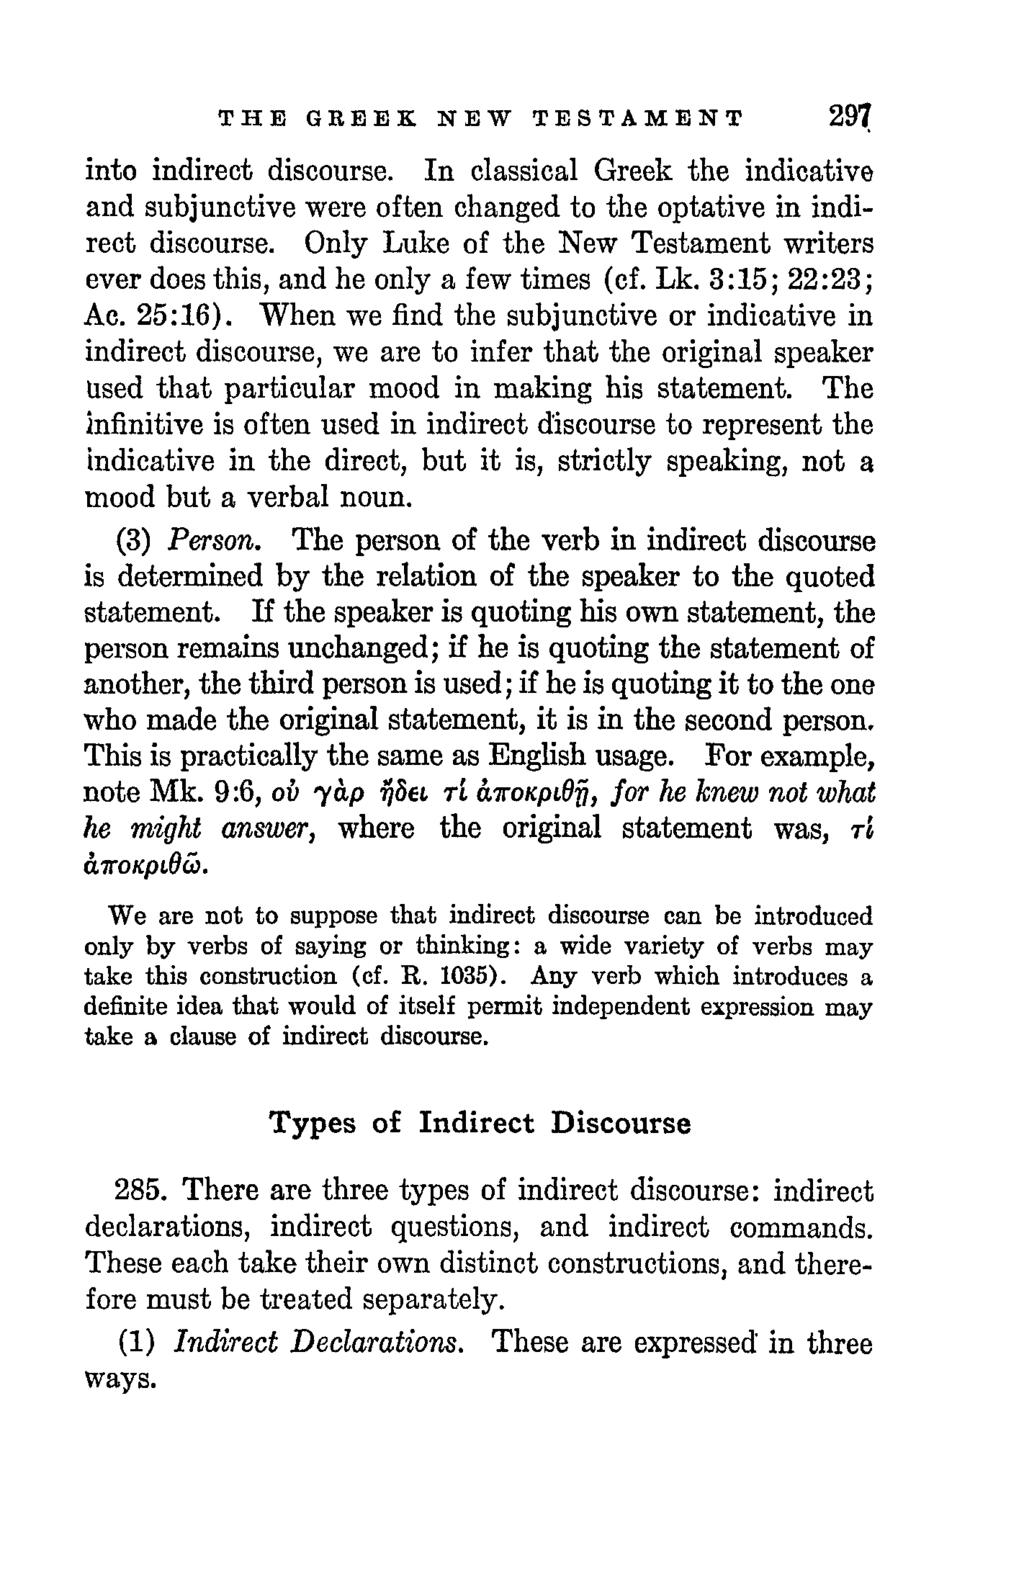 THE GREEK NEW TESTAMENT 297 into indirect discourse. In classical Greek the indicative and subjunctive were often changed to the optative in indirect discourse.